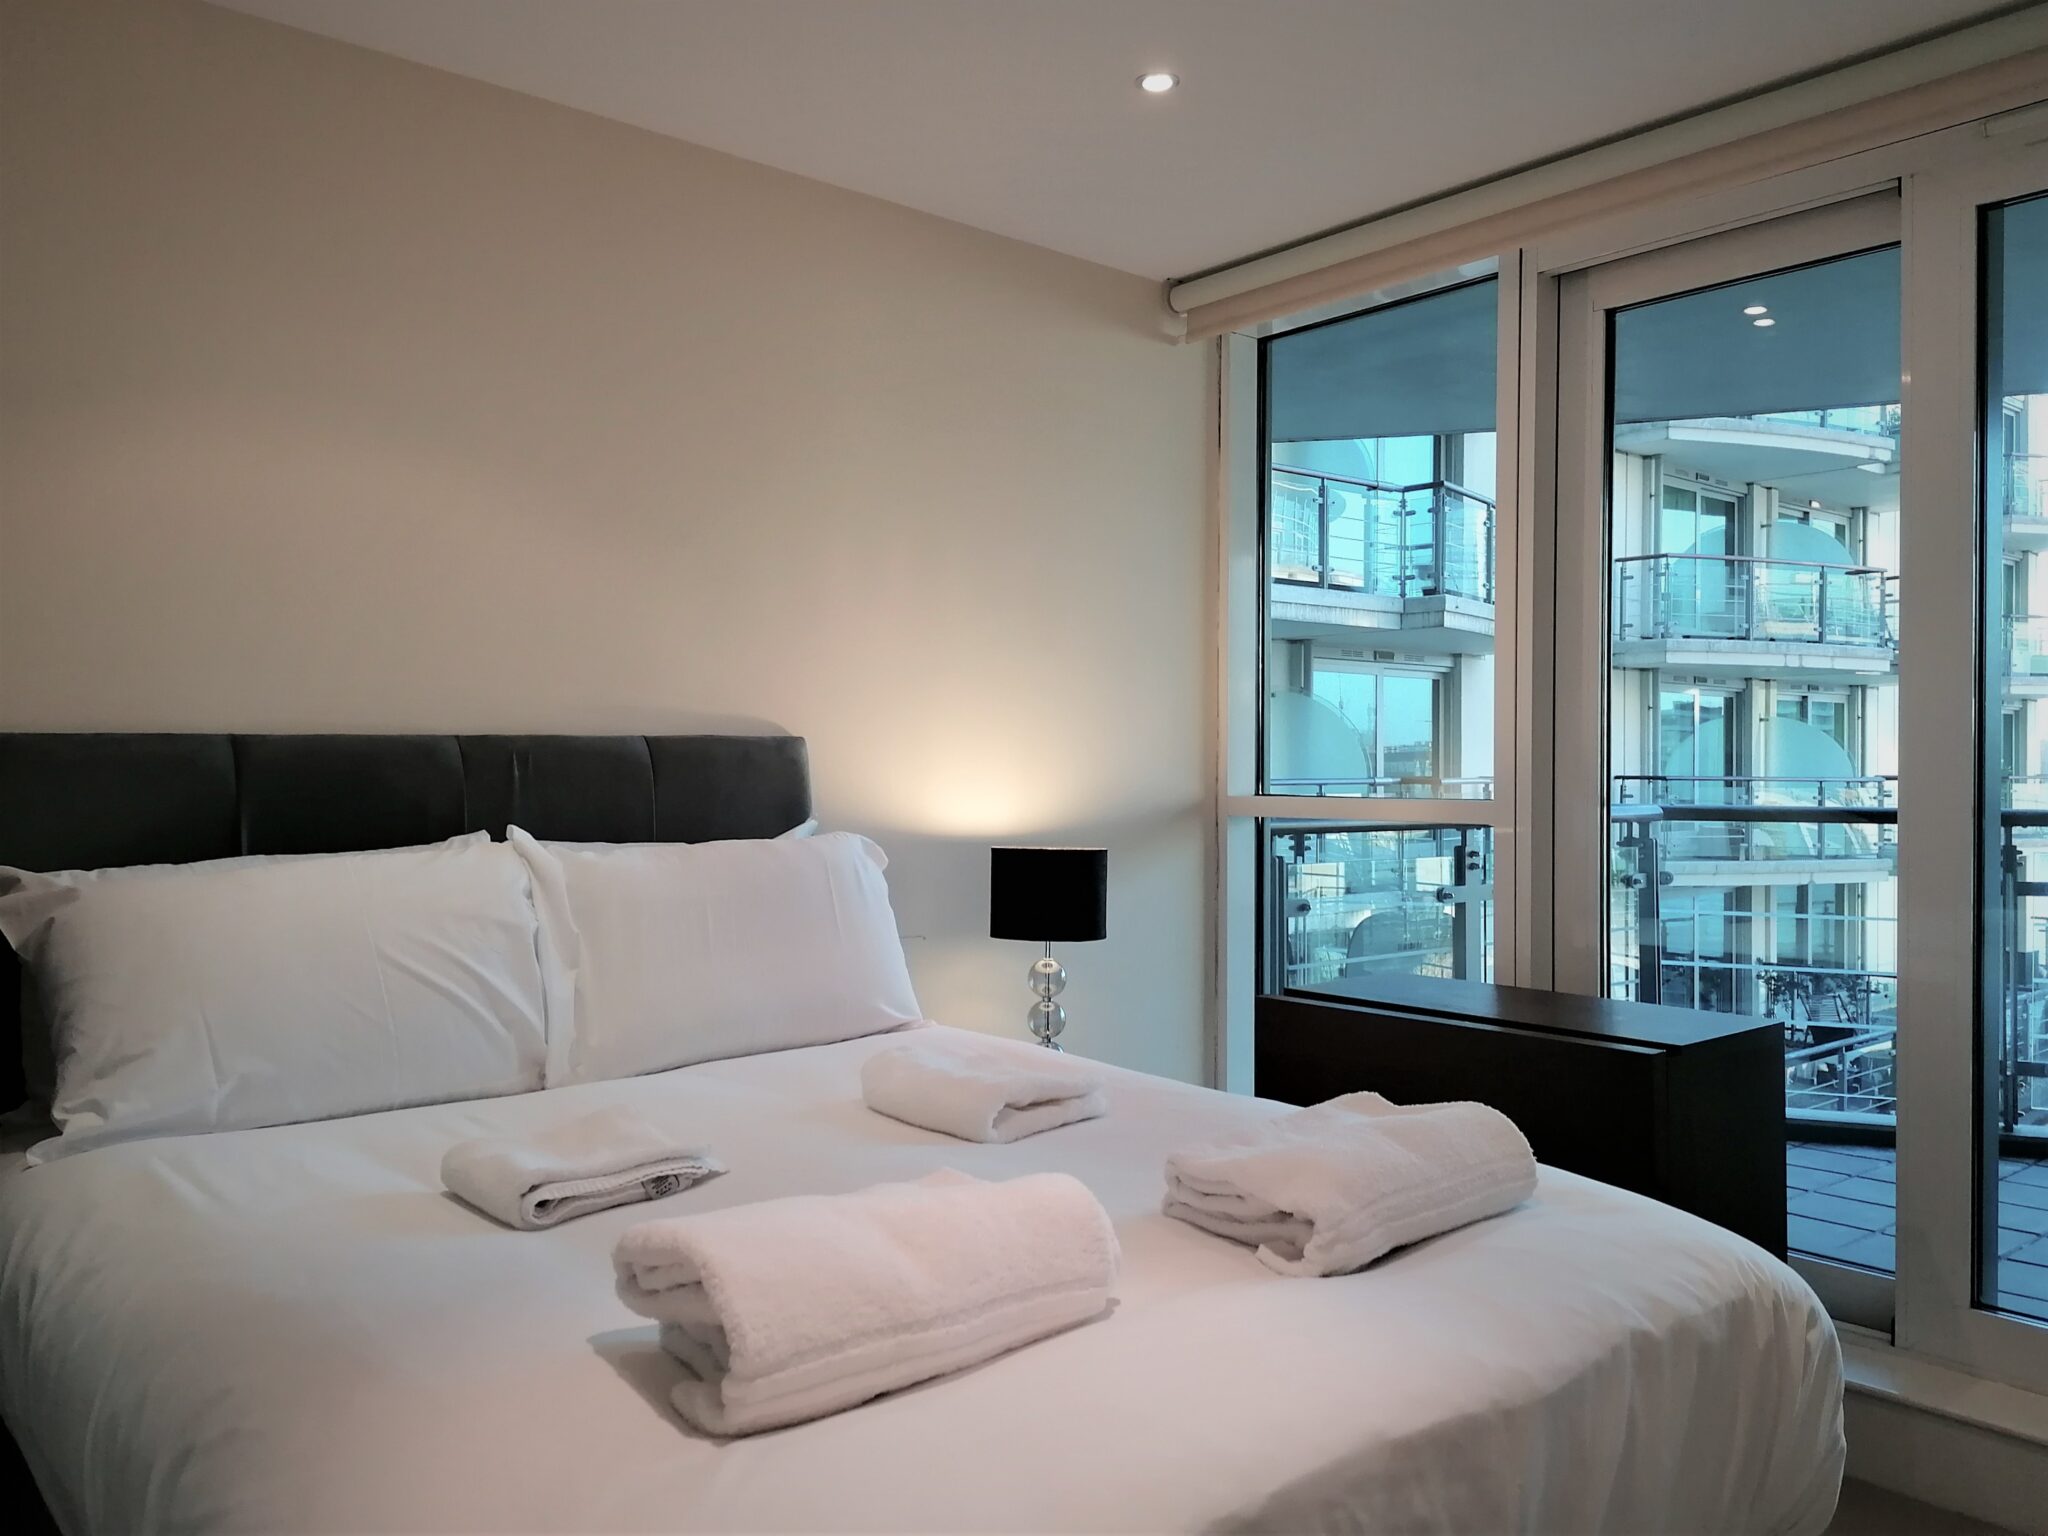 College Road Harrow Apartments - West London Serviced Apartments - London | Urban Stay